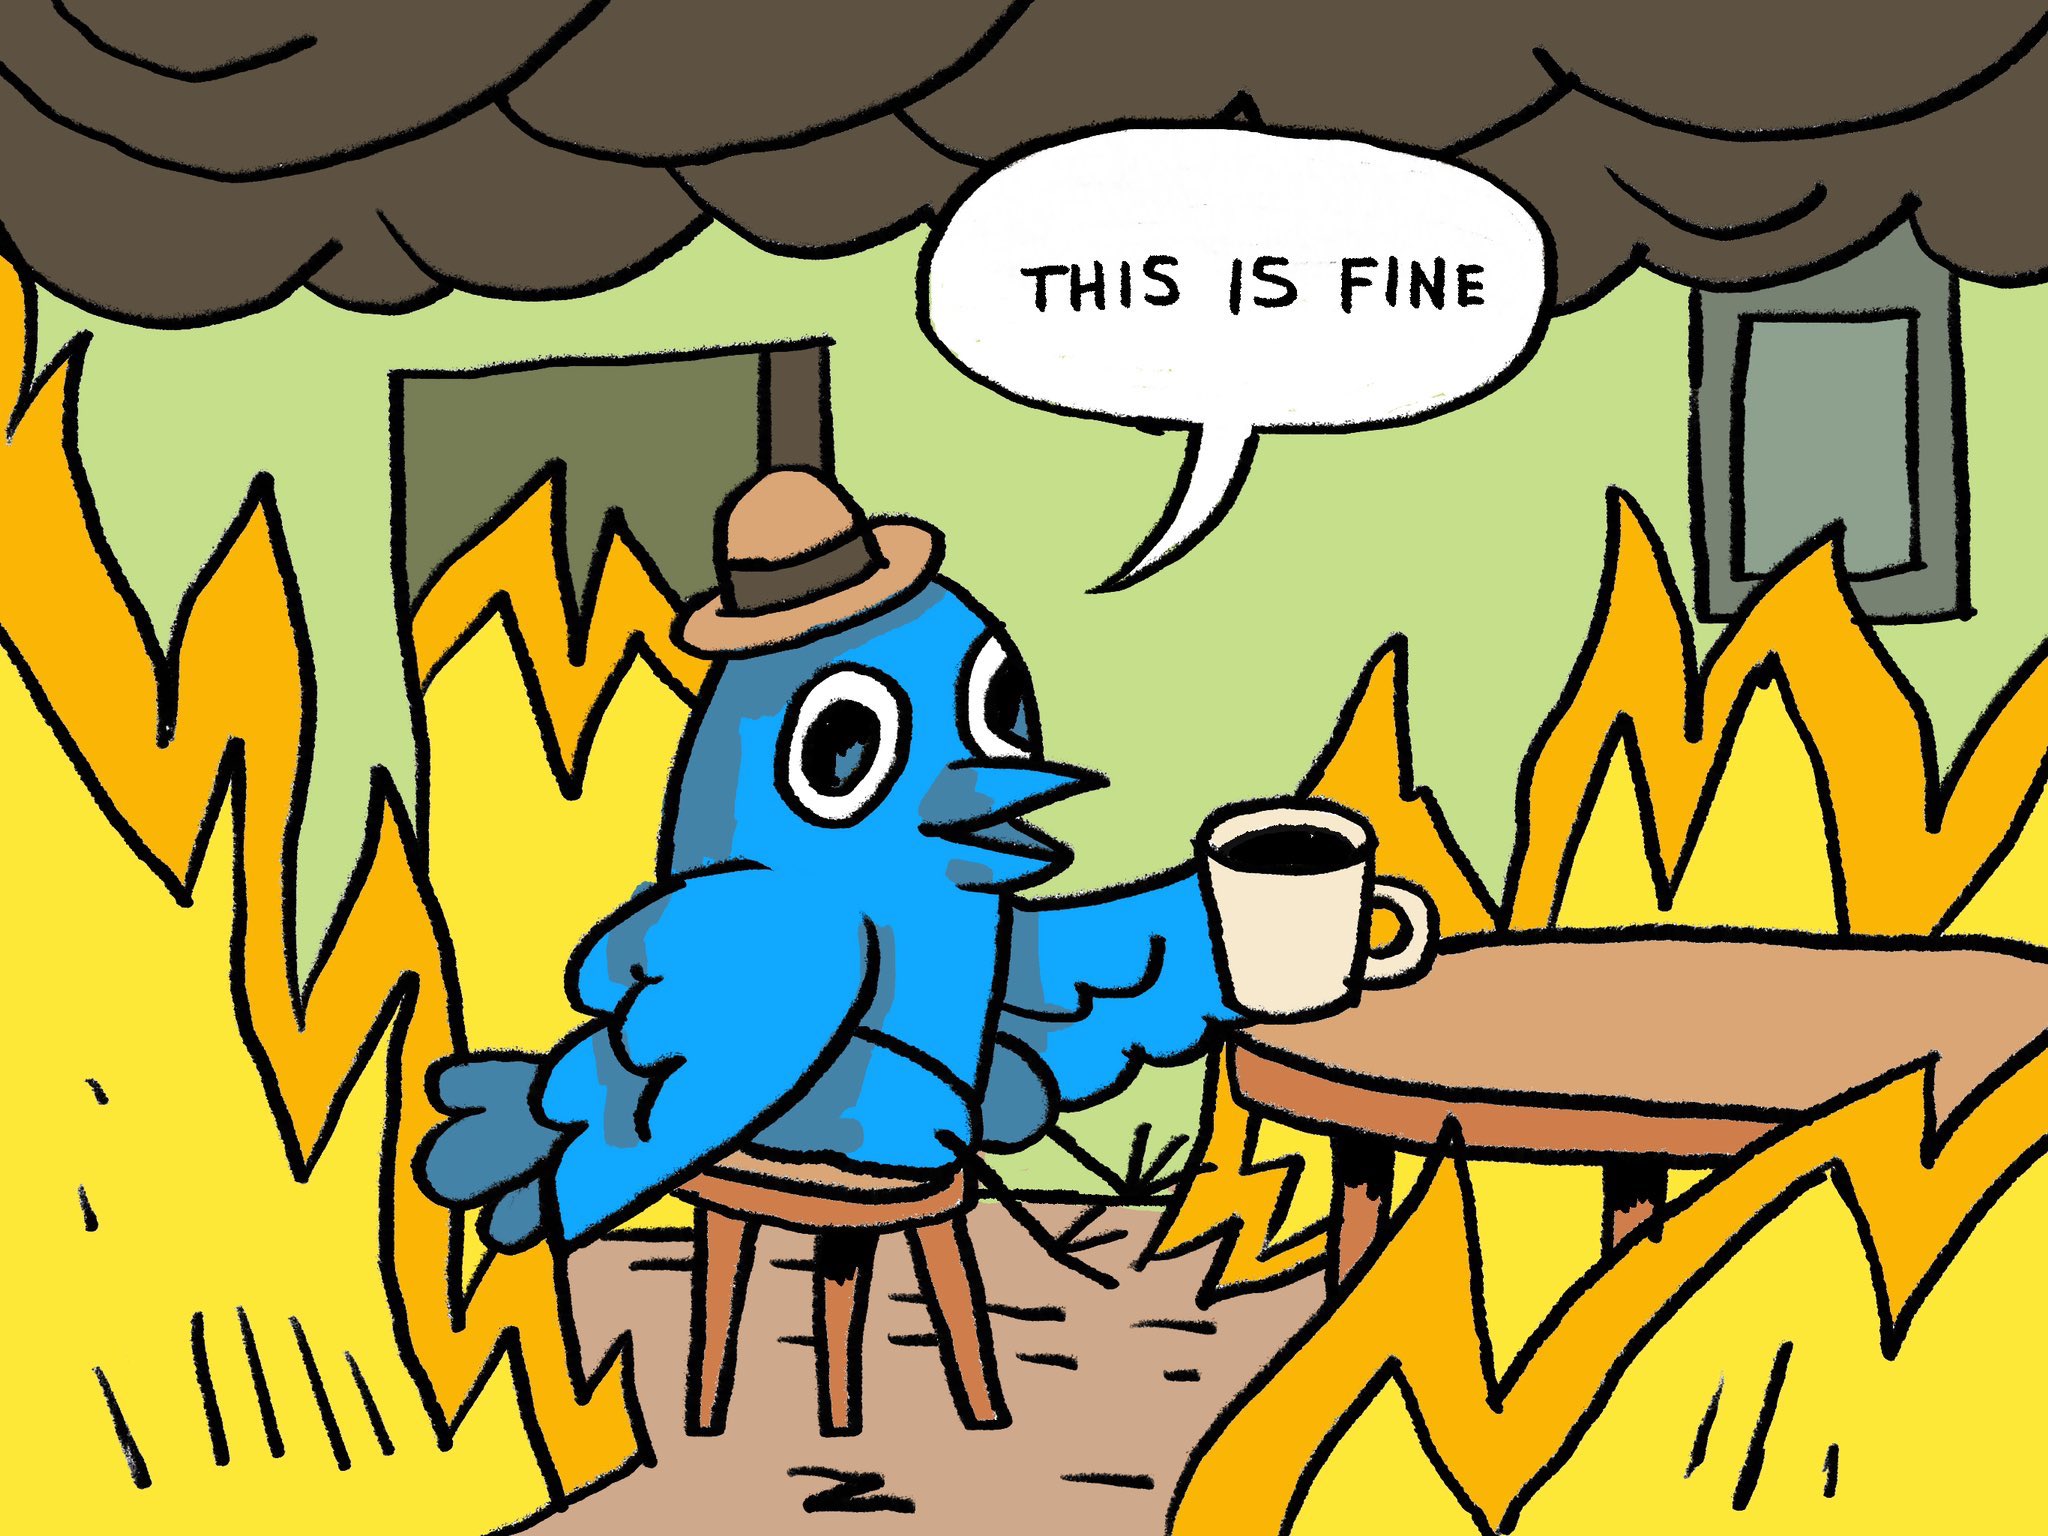 This is fine meme, but then  with the Twitter bird